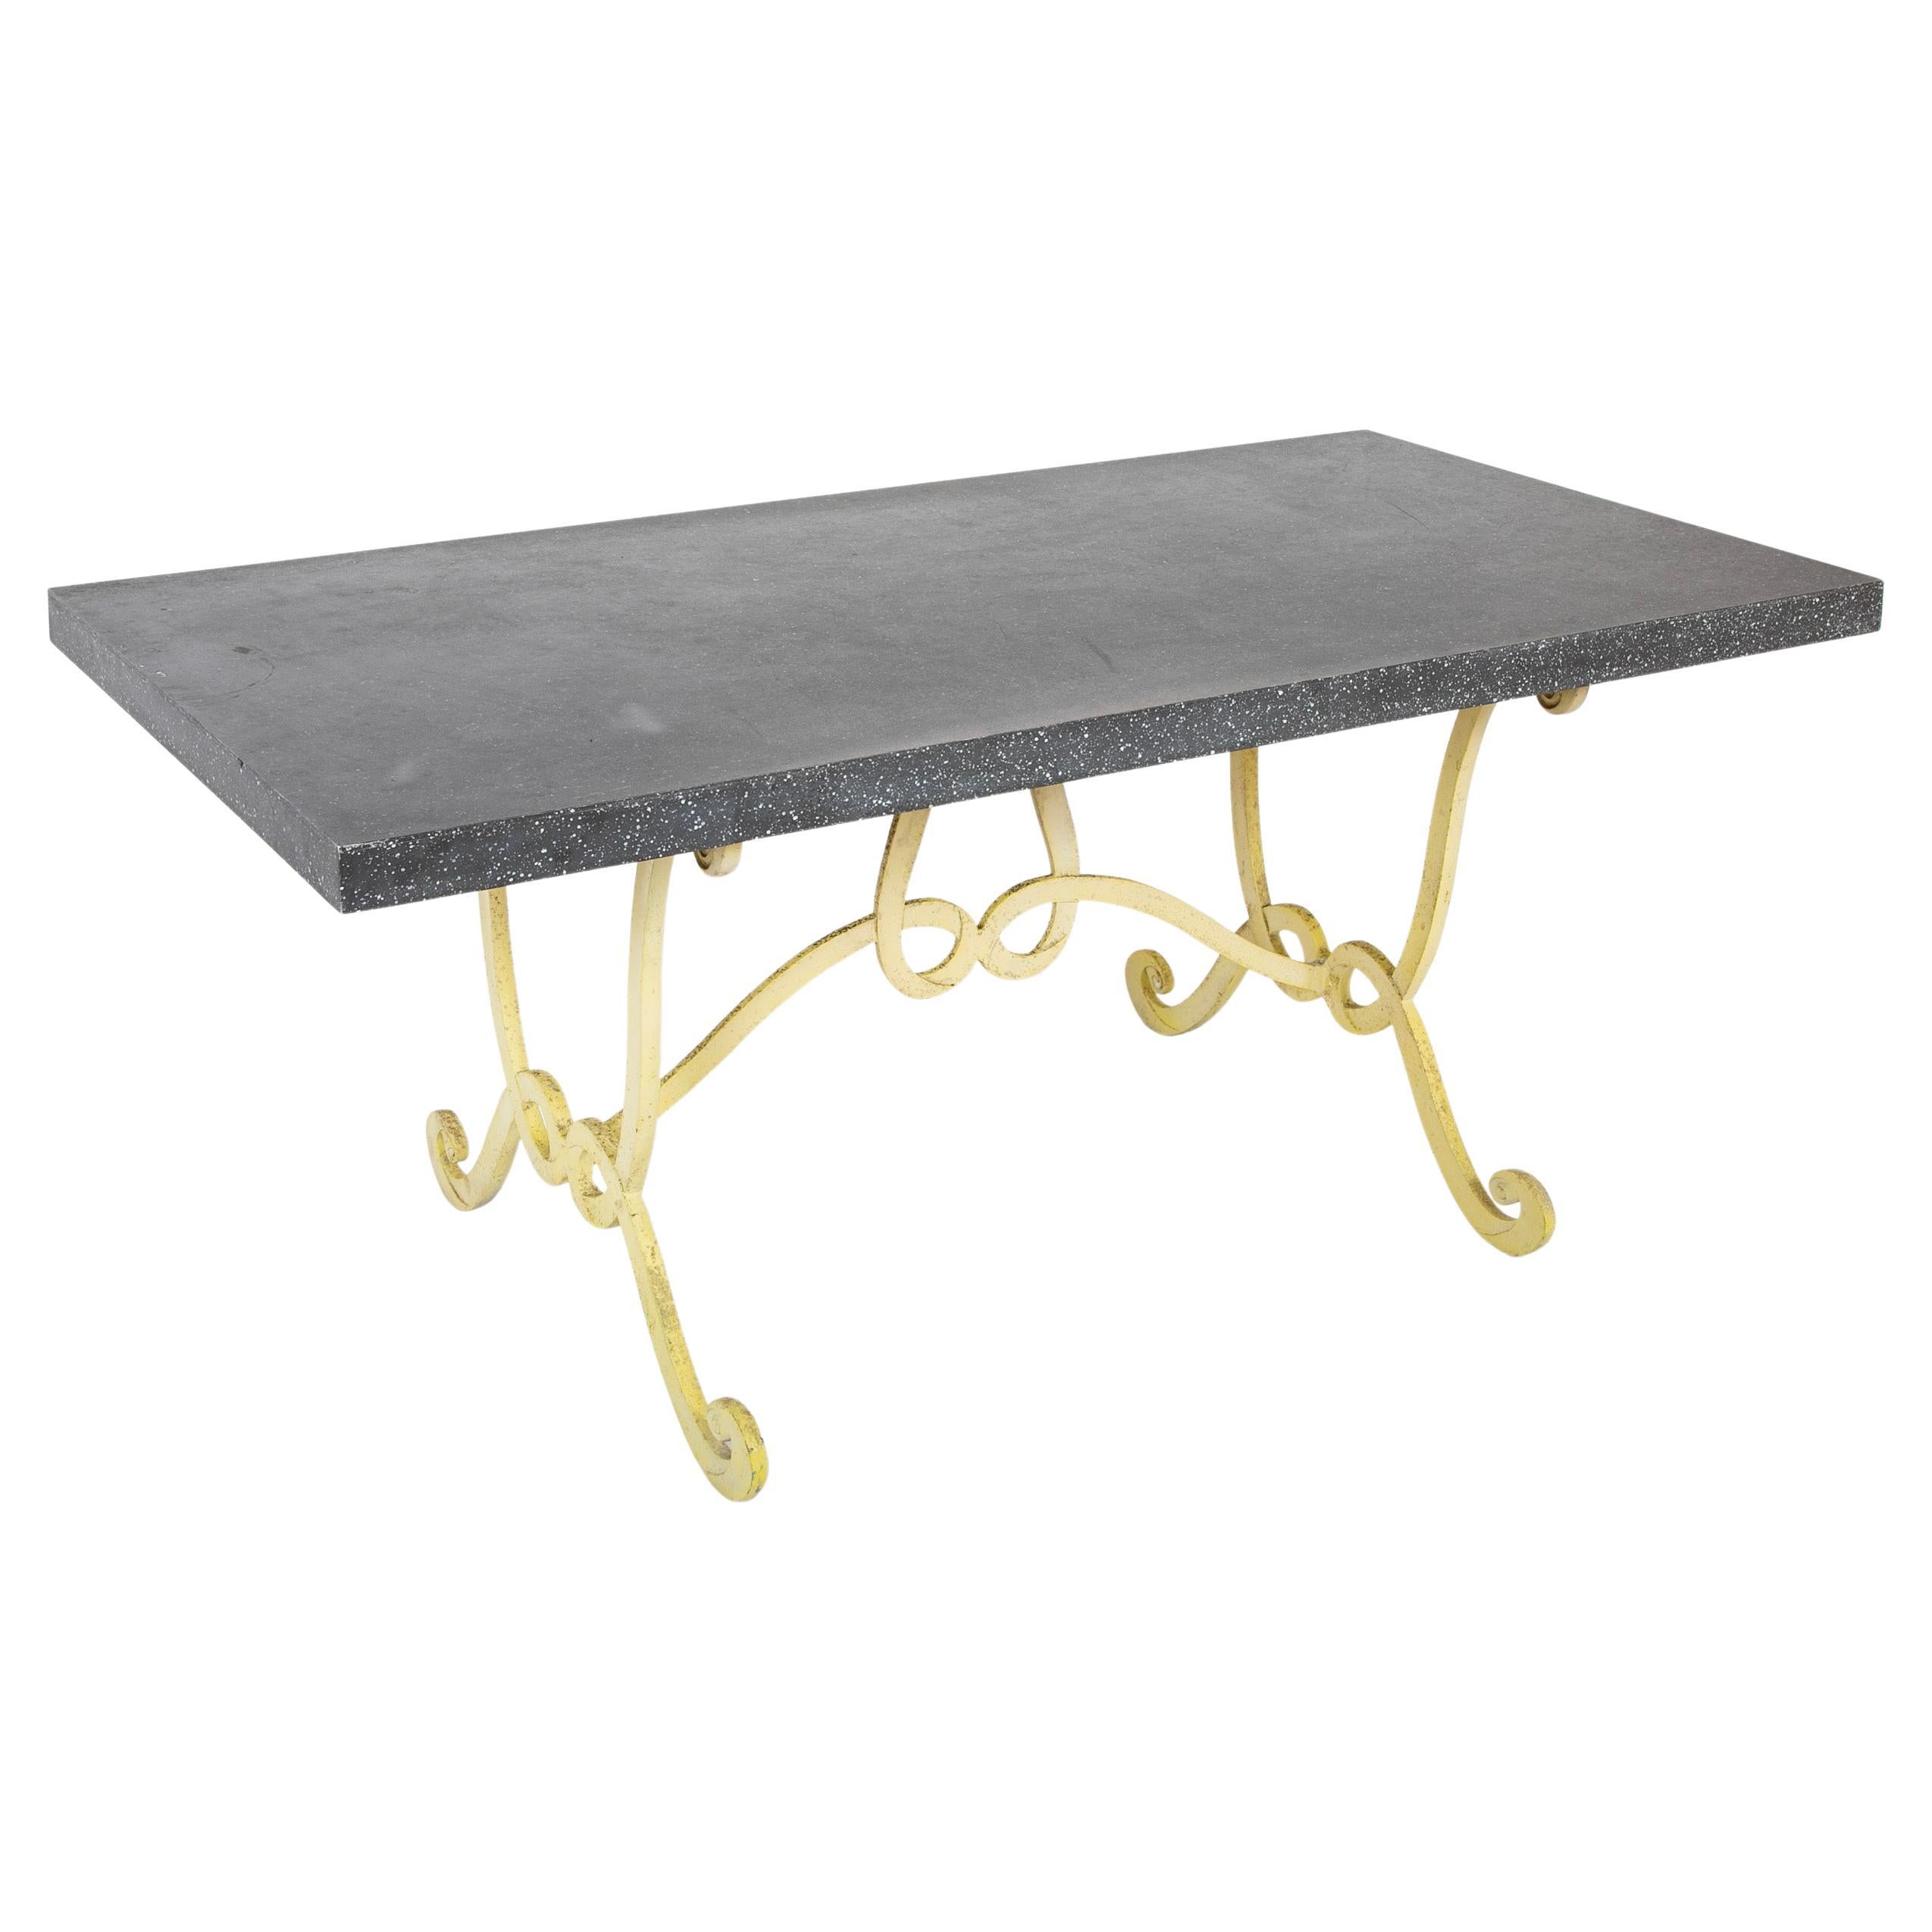 Dorothy Draper Table With Faux Porphyry Steel Top And Yellow Wrought Iron Base